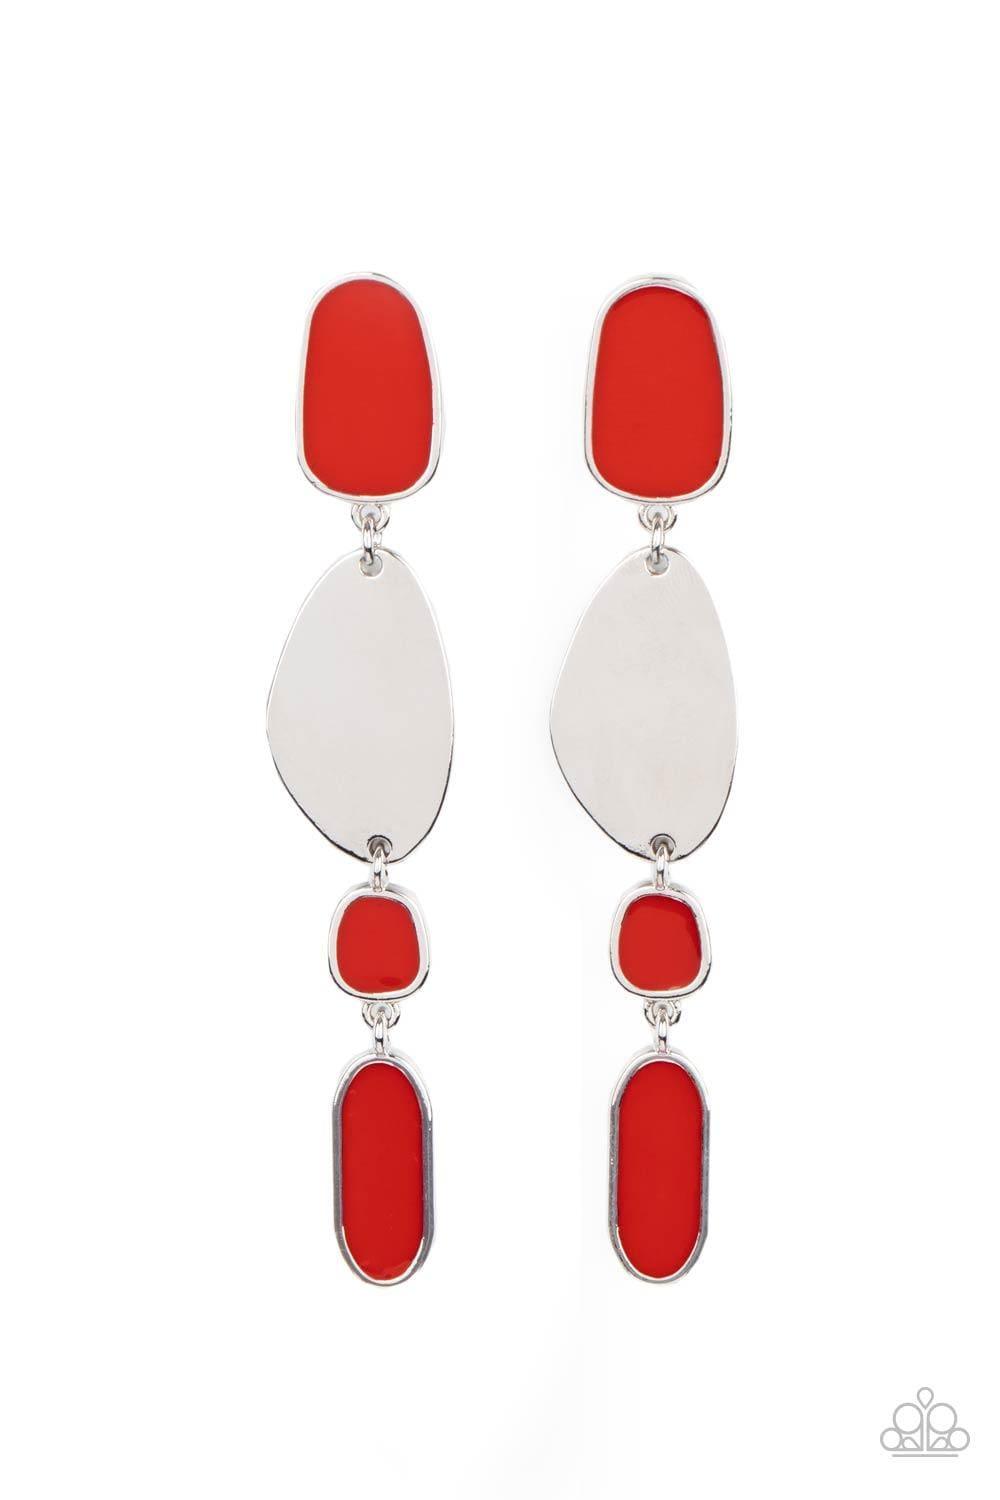 Paparazzi Accessories - Deco By Design - Red Earrings - Bling by JessieK